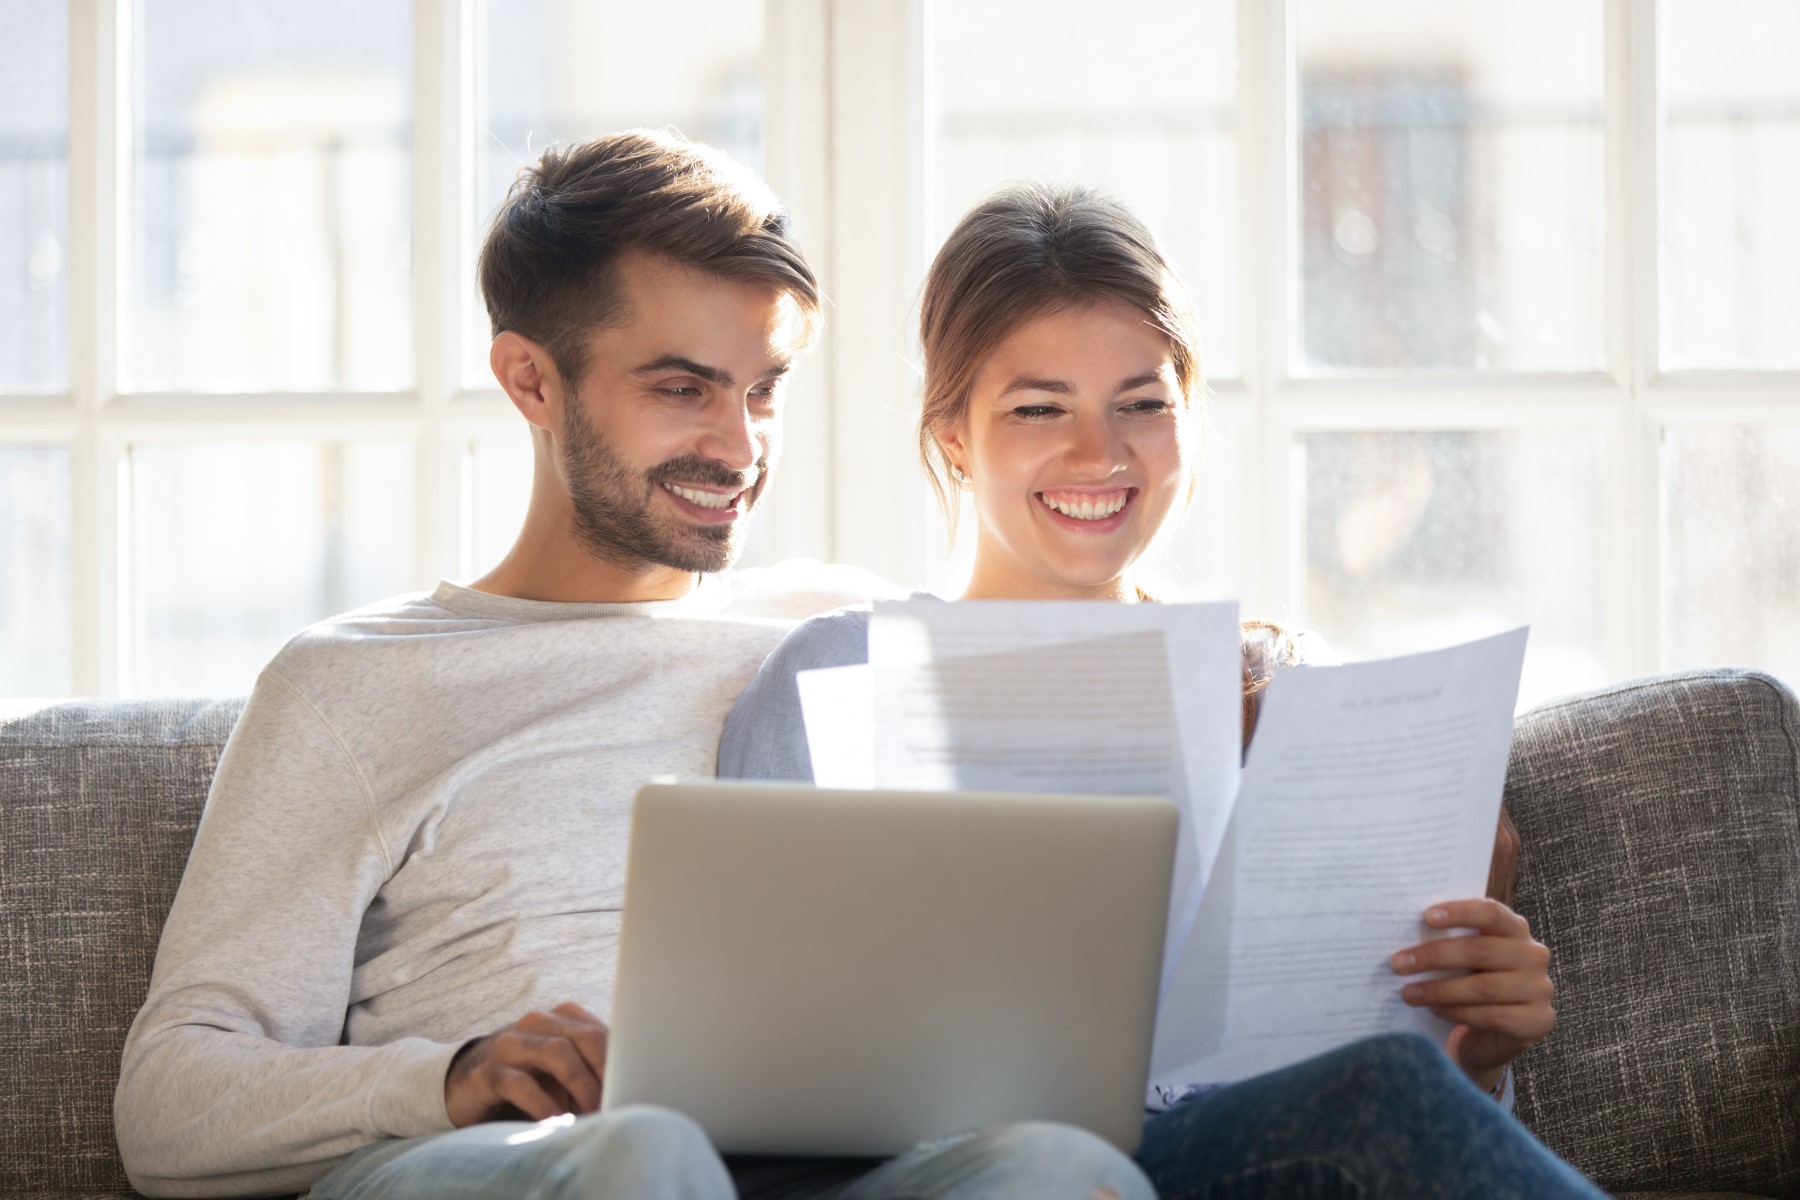 Smiling couple read paper documents on the couch together.